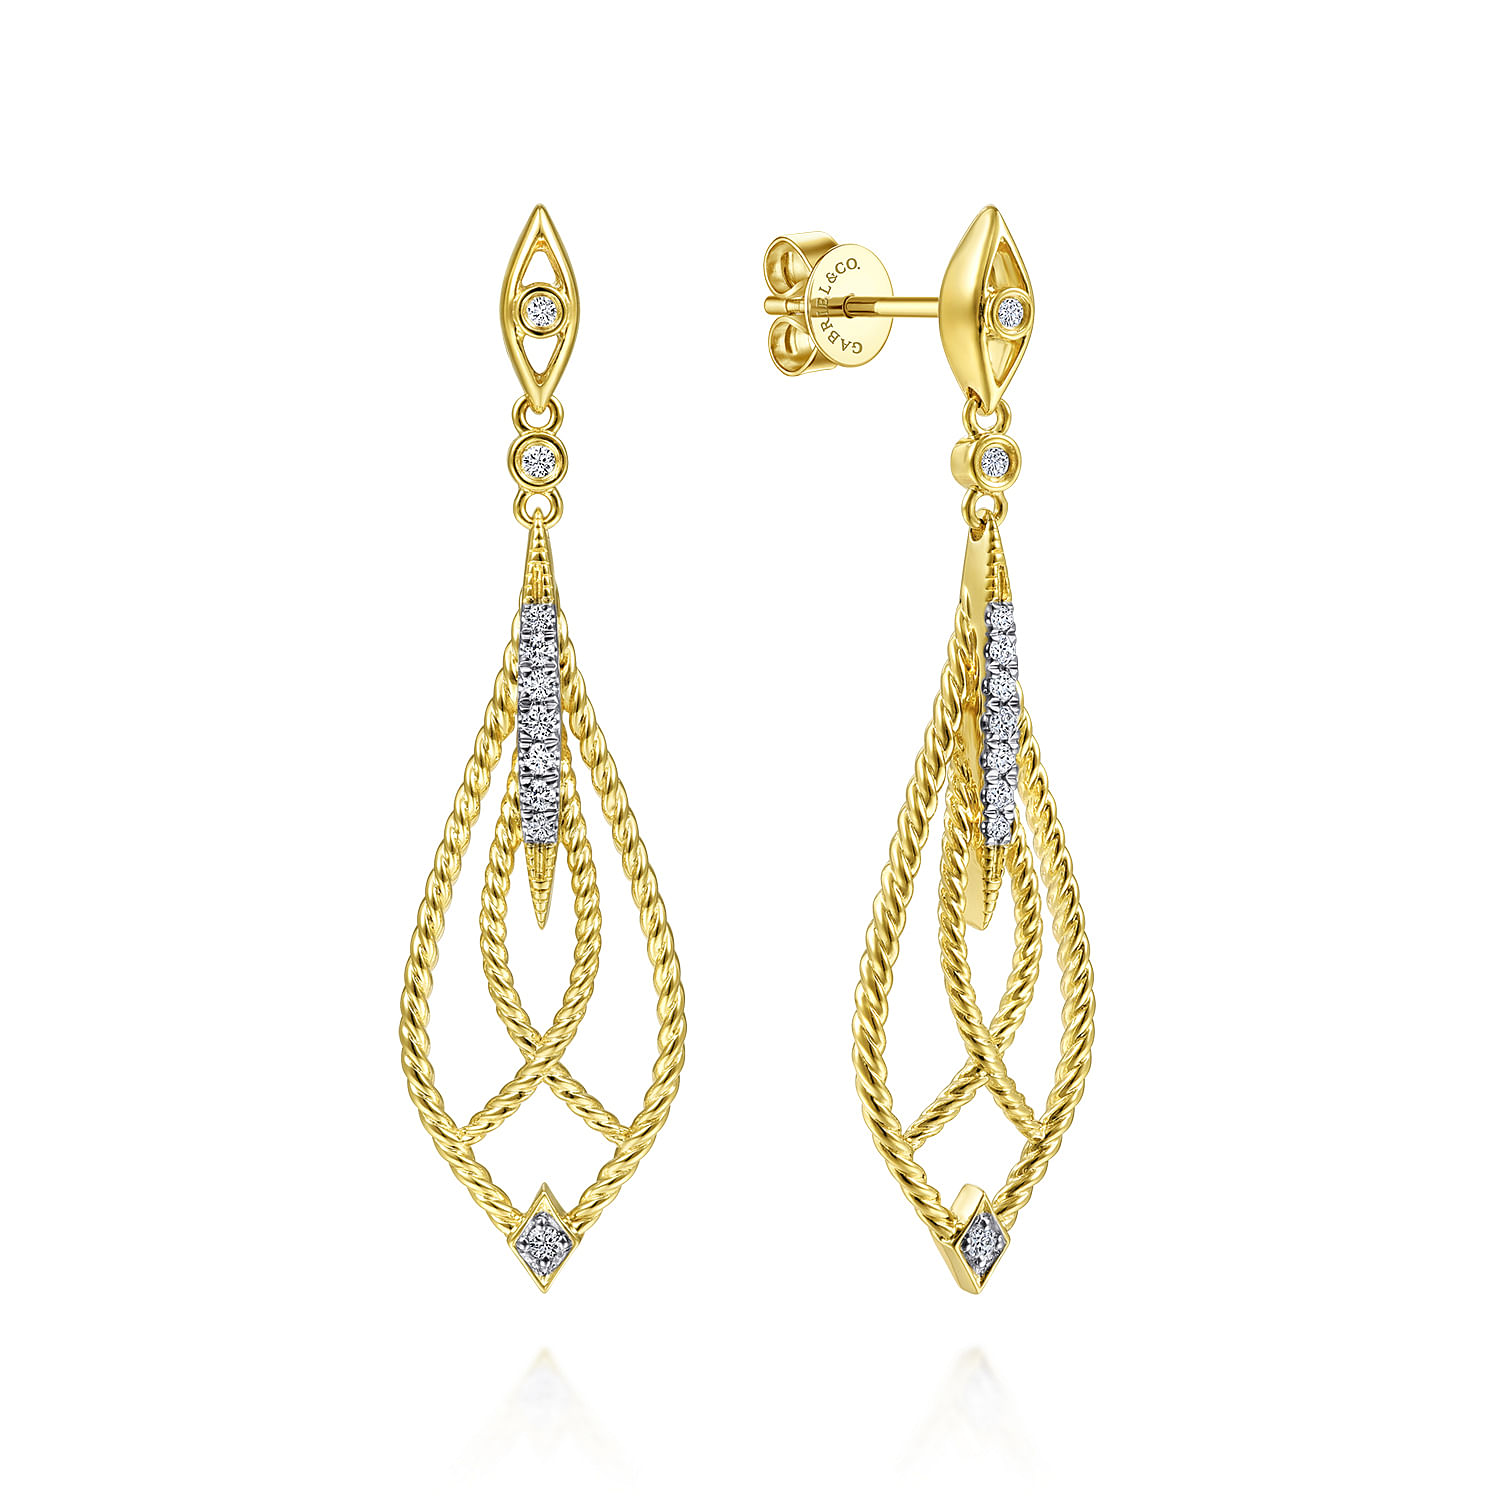 Gabriel - 14K Yellow Gold Open Twisted Rope Drop Earrings with Diamond Accents